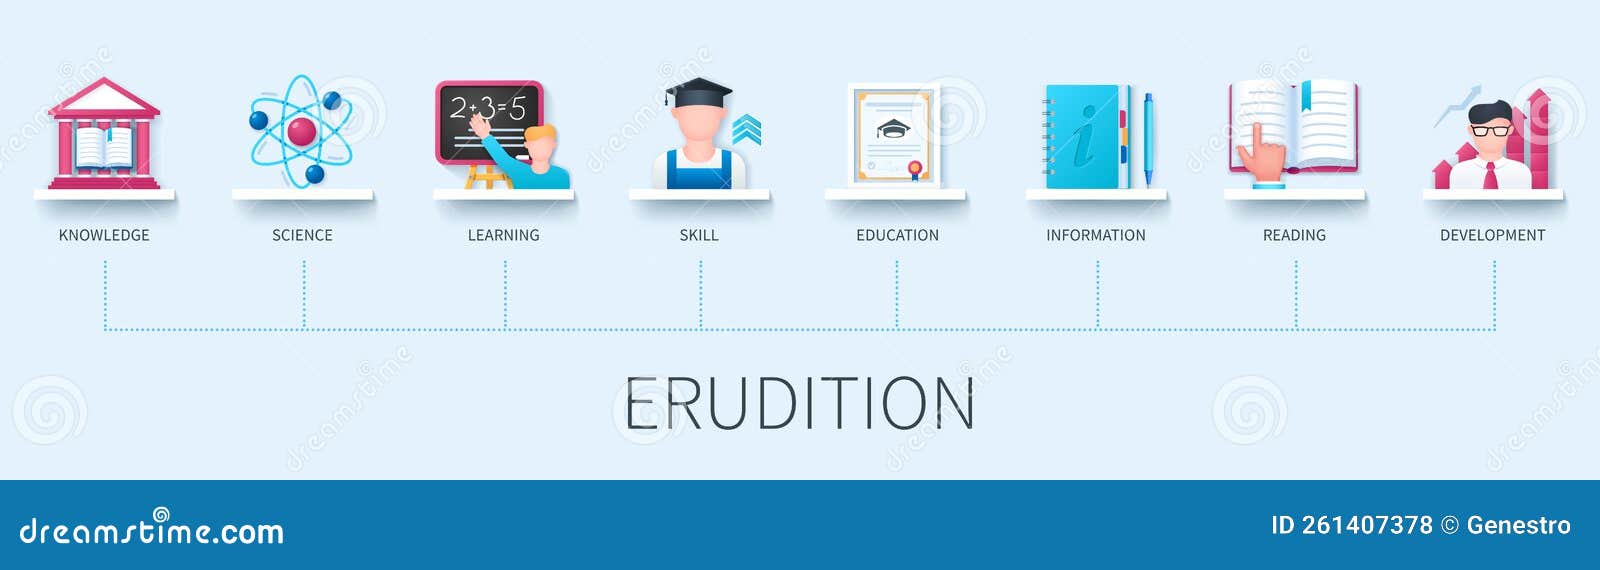 erudition banner with icons  infographic in 3d style